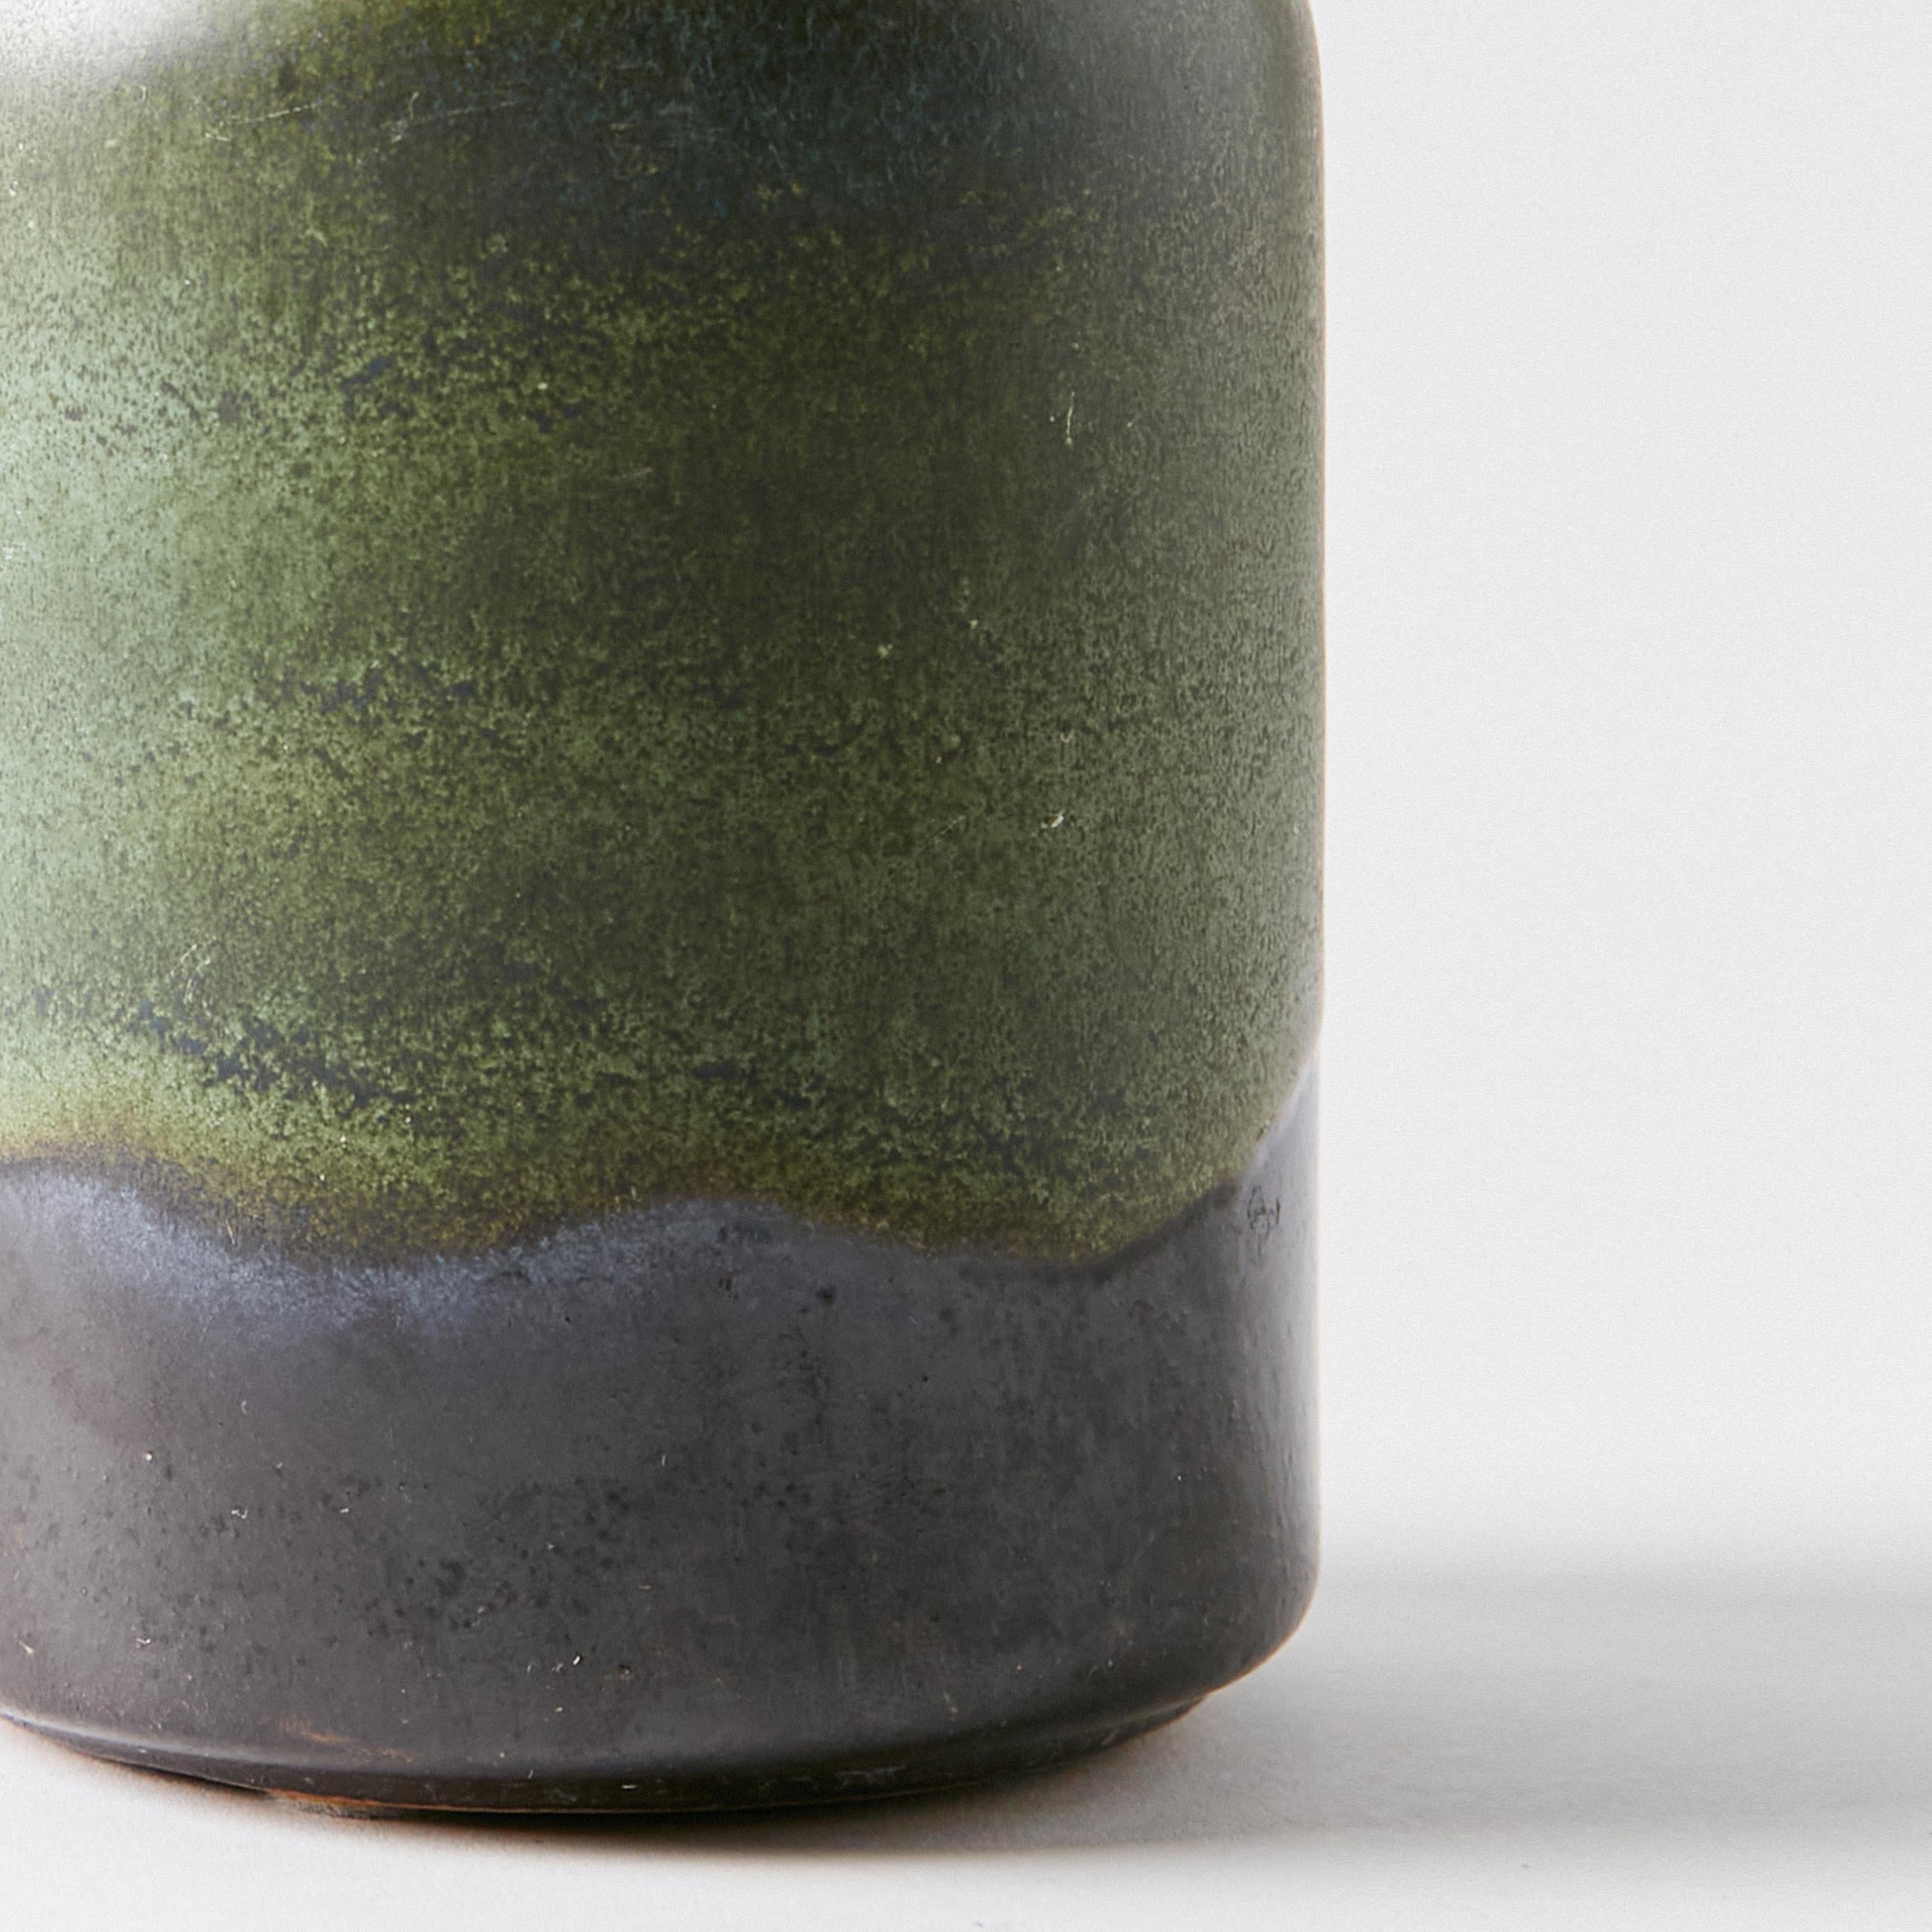 Glazed German Fat Lava Vase in Dry Green Tones, West Germany, 1960s For Sale